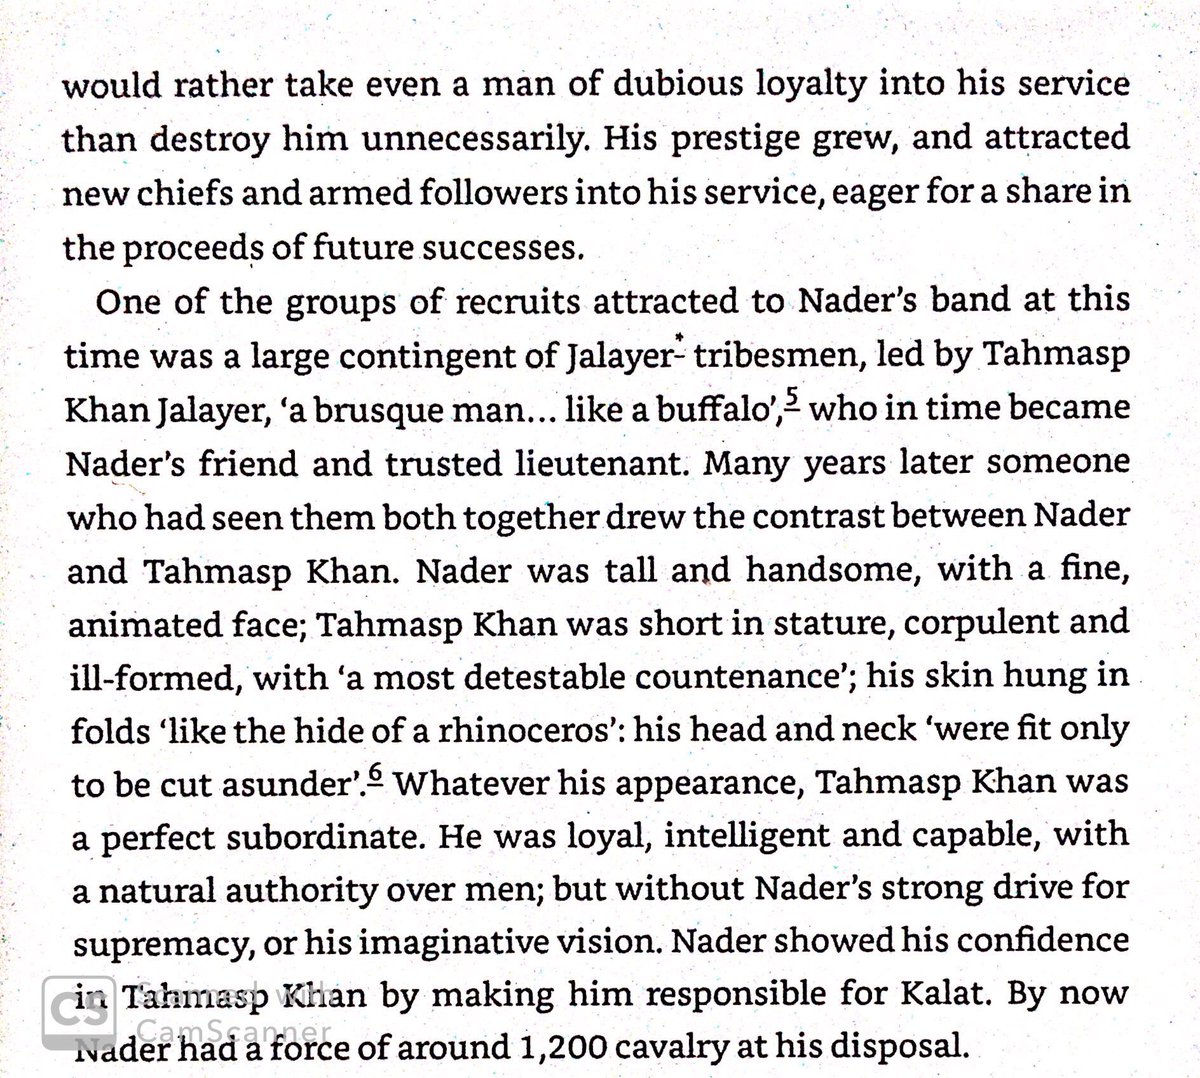 After the Afghans took Isfahan, Persia fragmented. Nader gradually built his forces, killing those that betrayed him but accepting those who had him but swore loyalty.